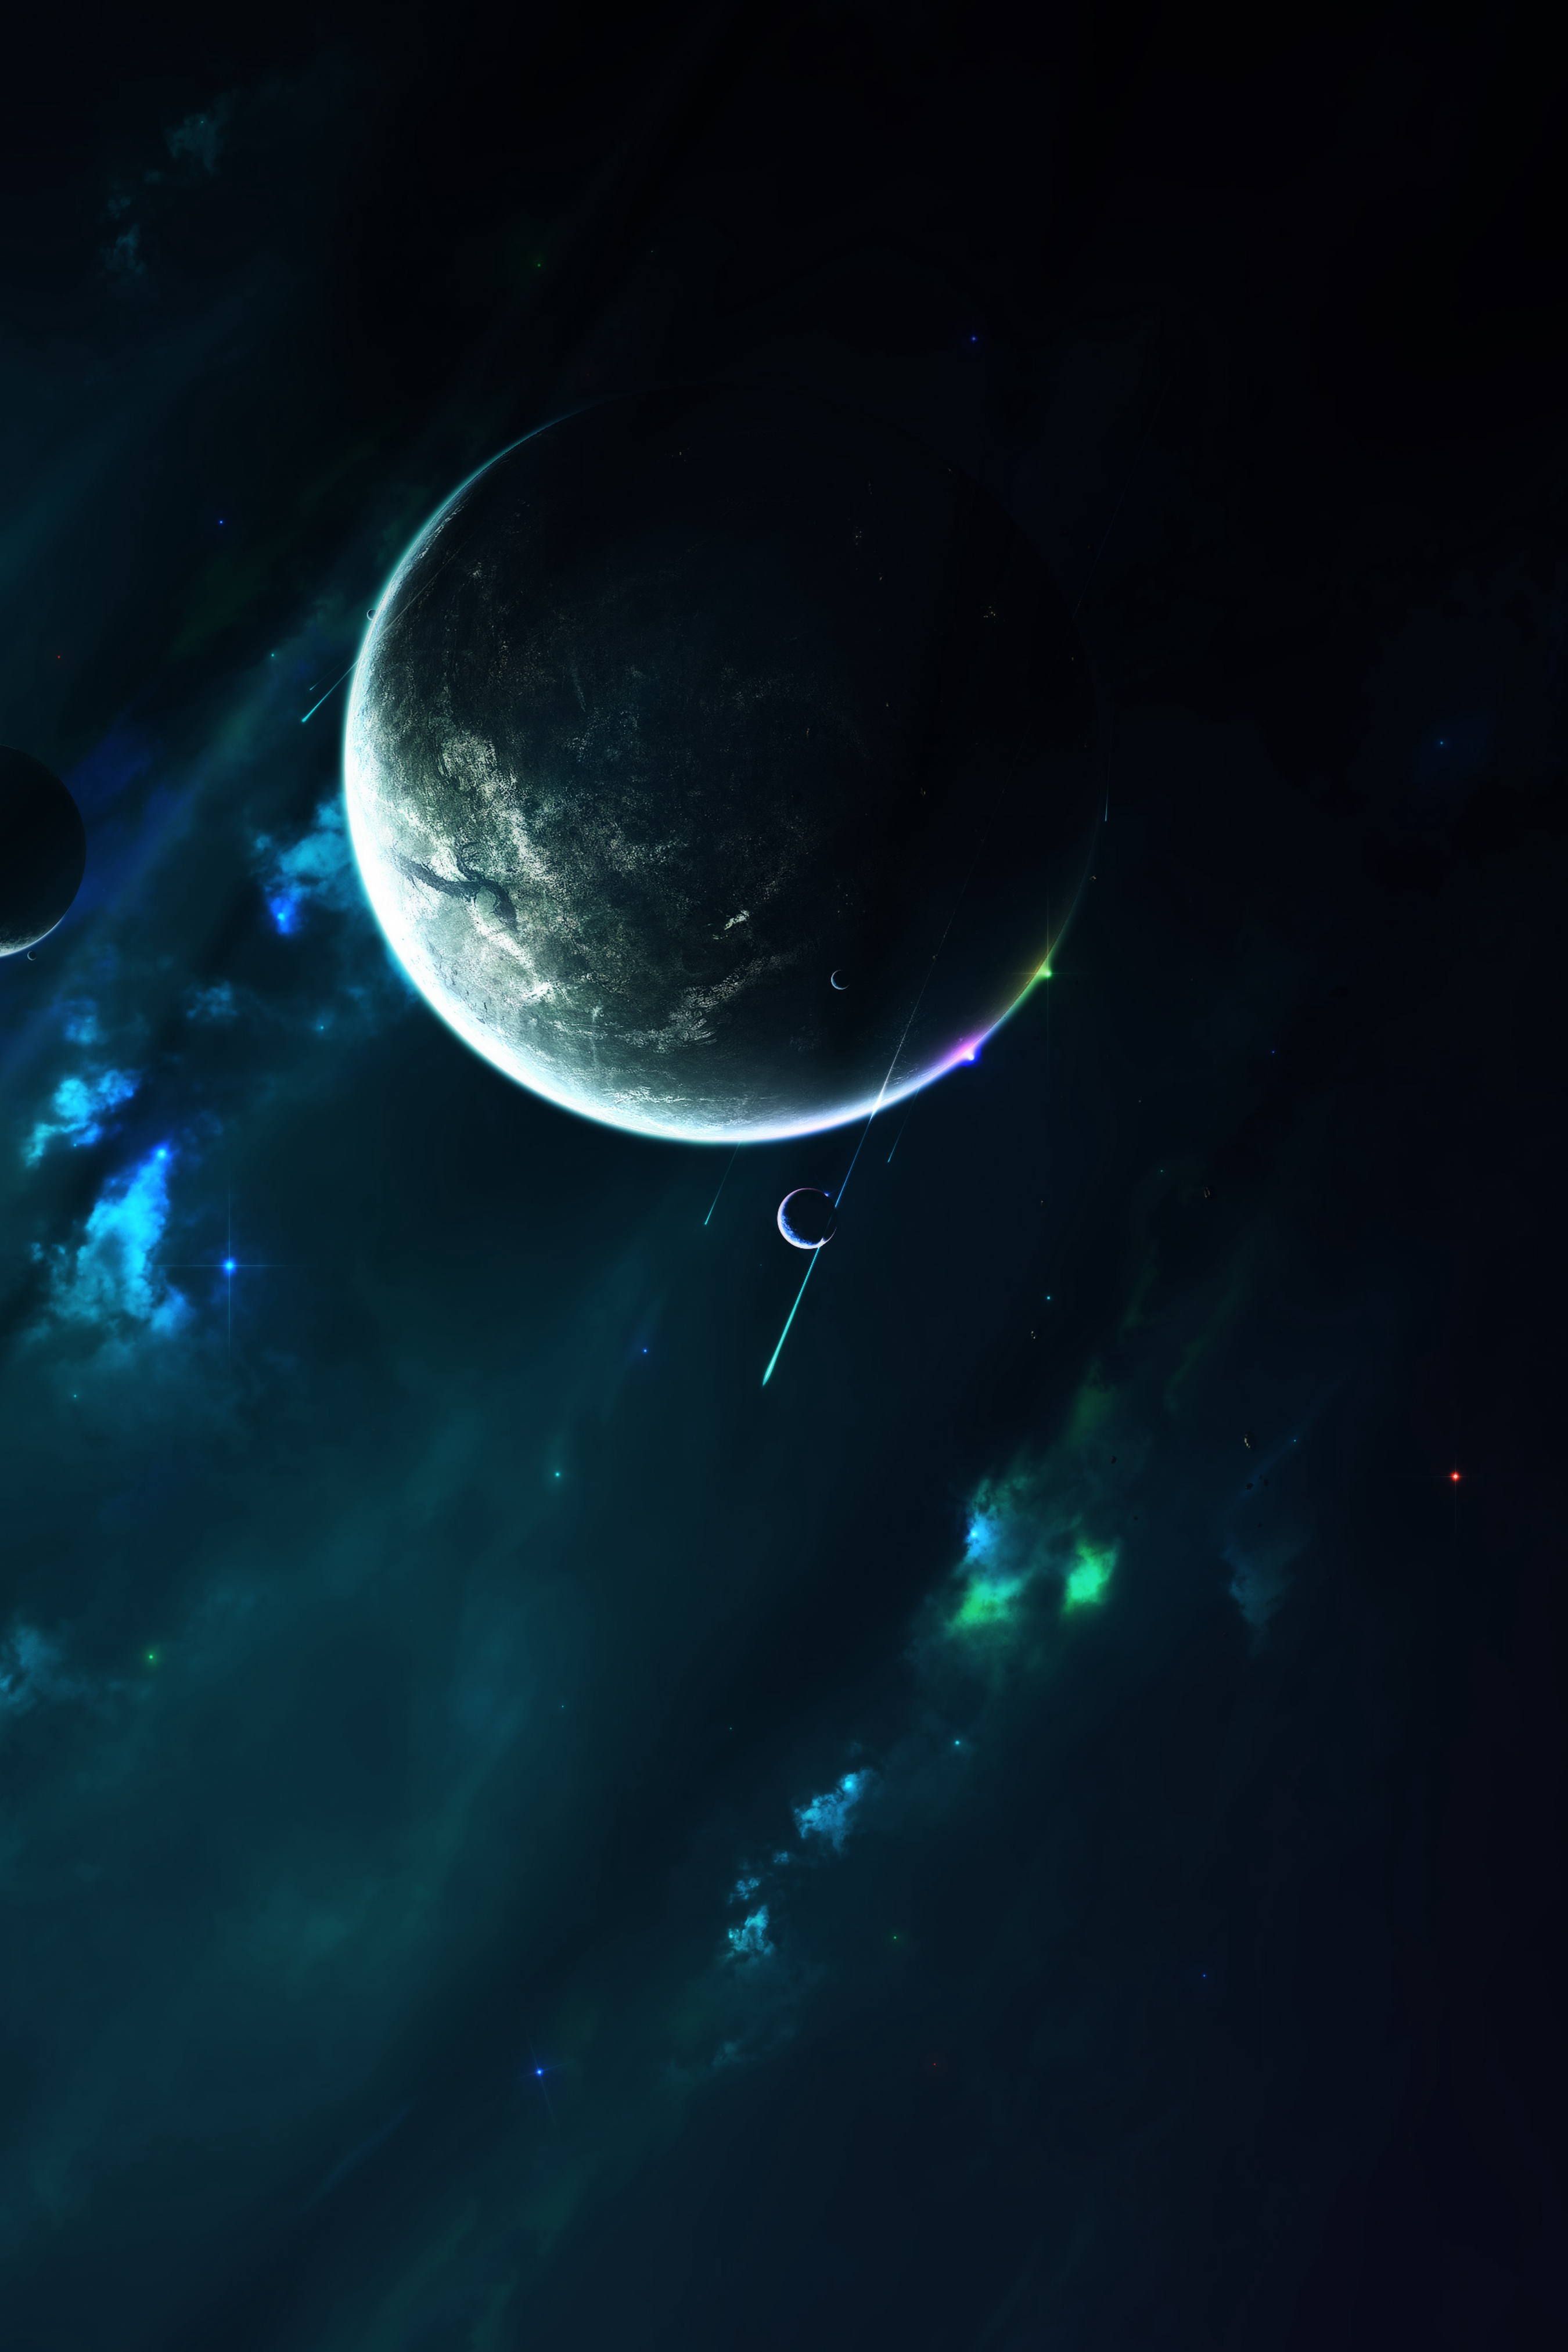 galaxy, universe, stars, planet, satellite, open space lock screen backgrounds